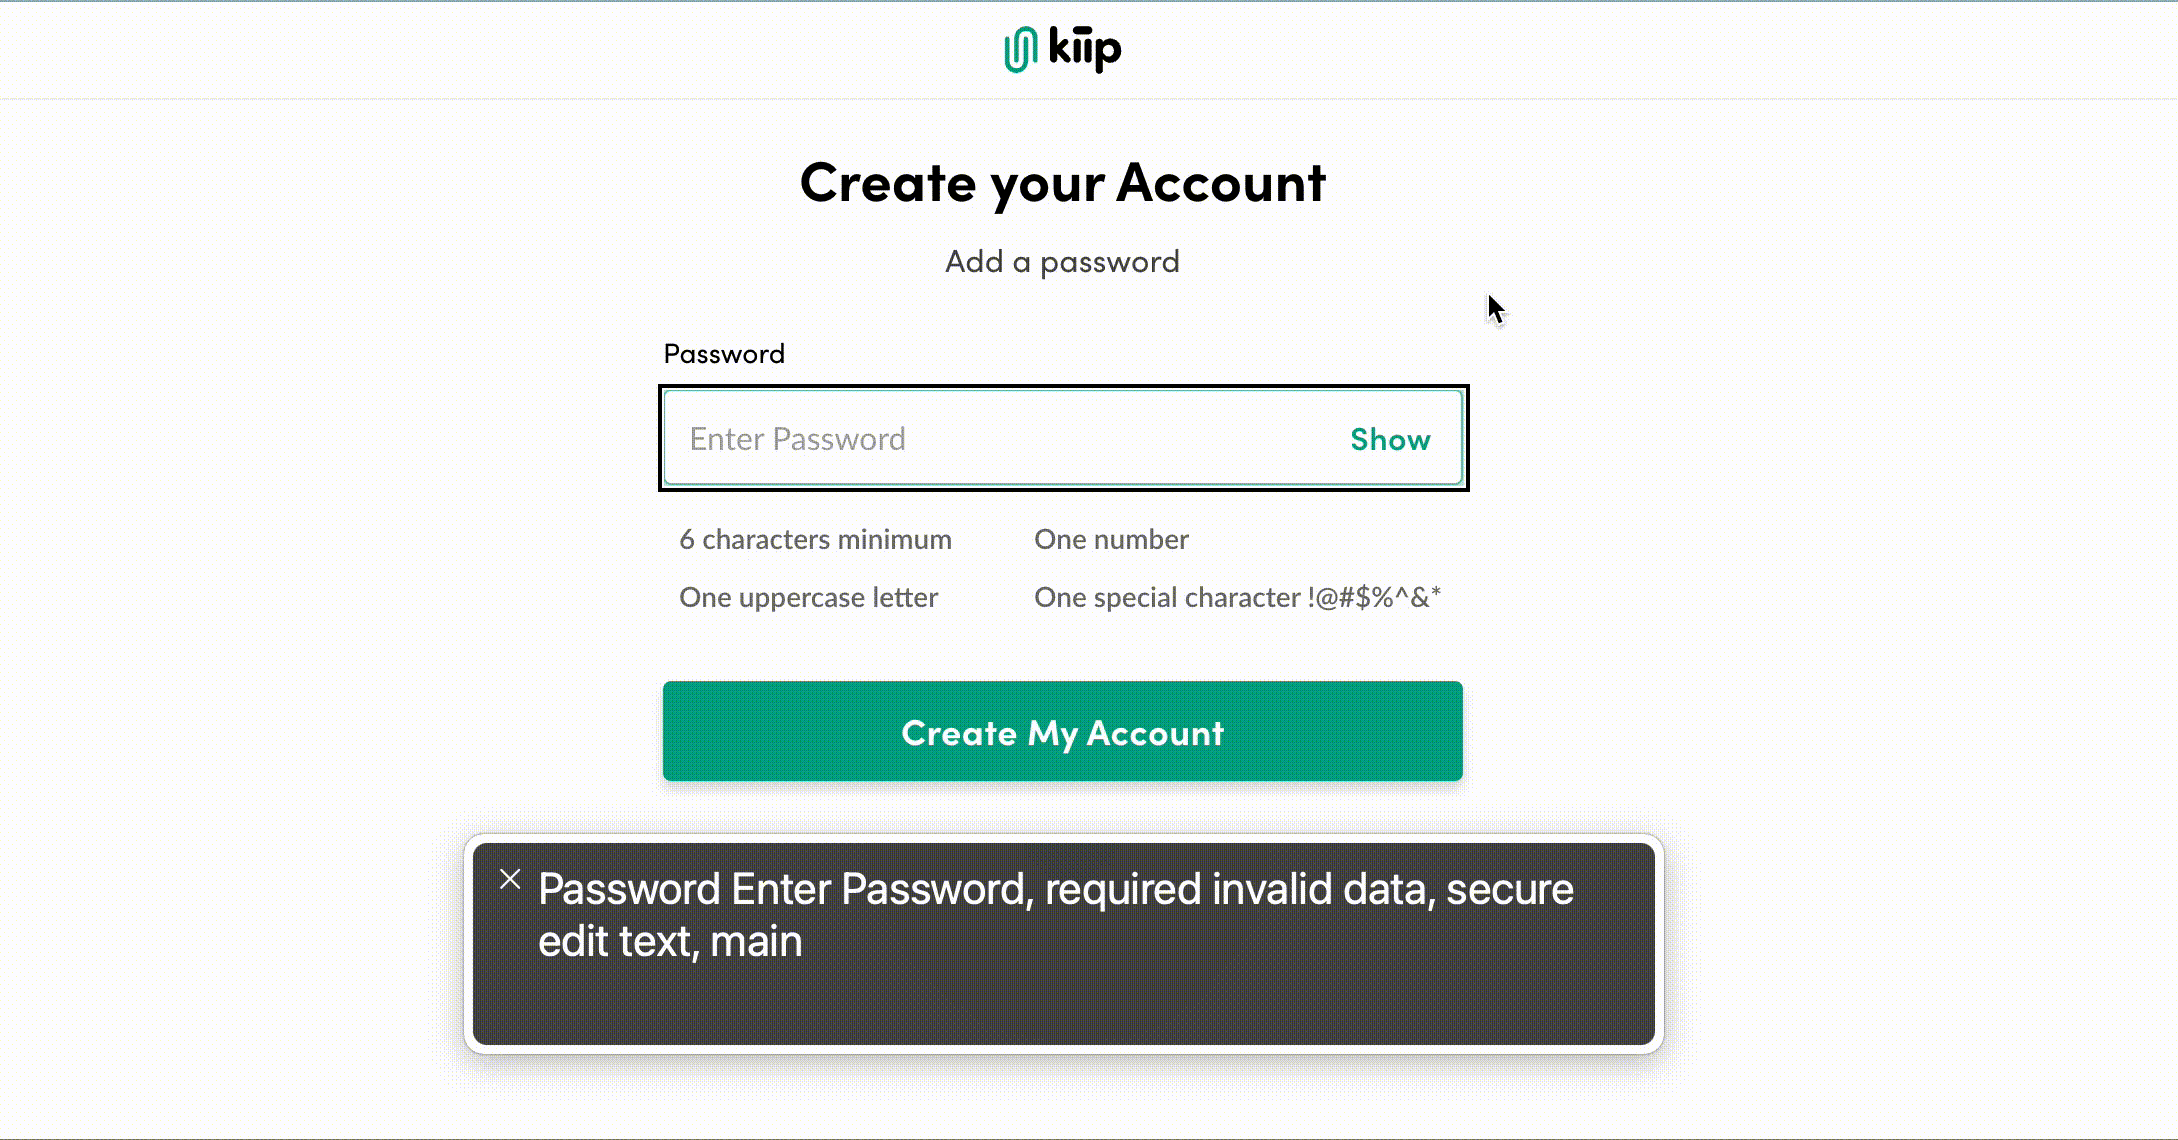 A demonstration of a password progress indicator and corresponding screen reader output on the Kiip website.